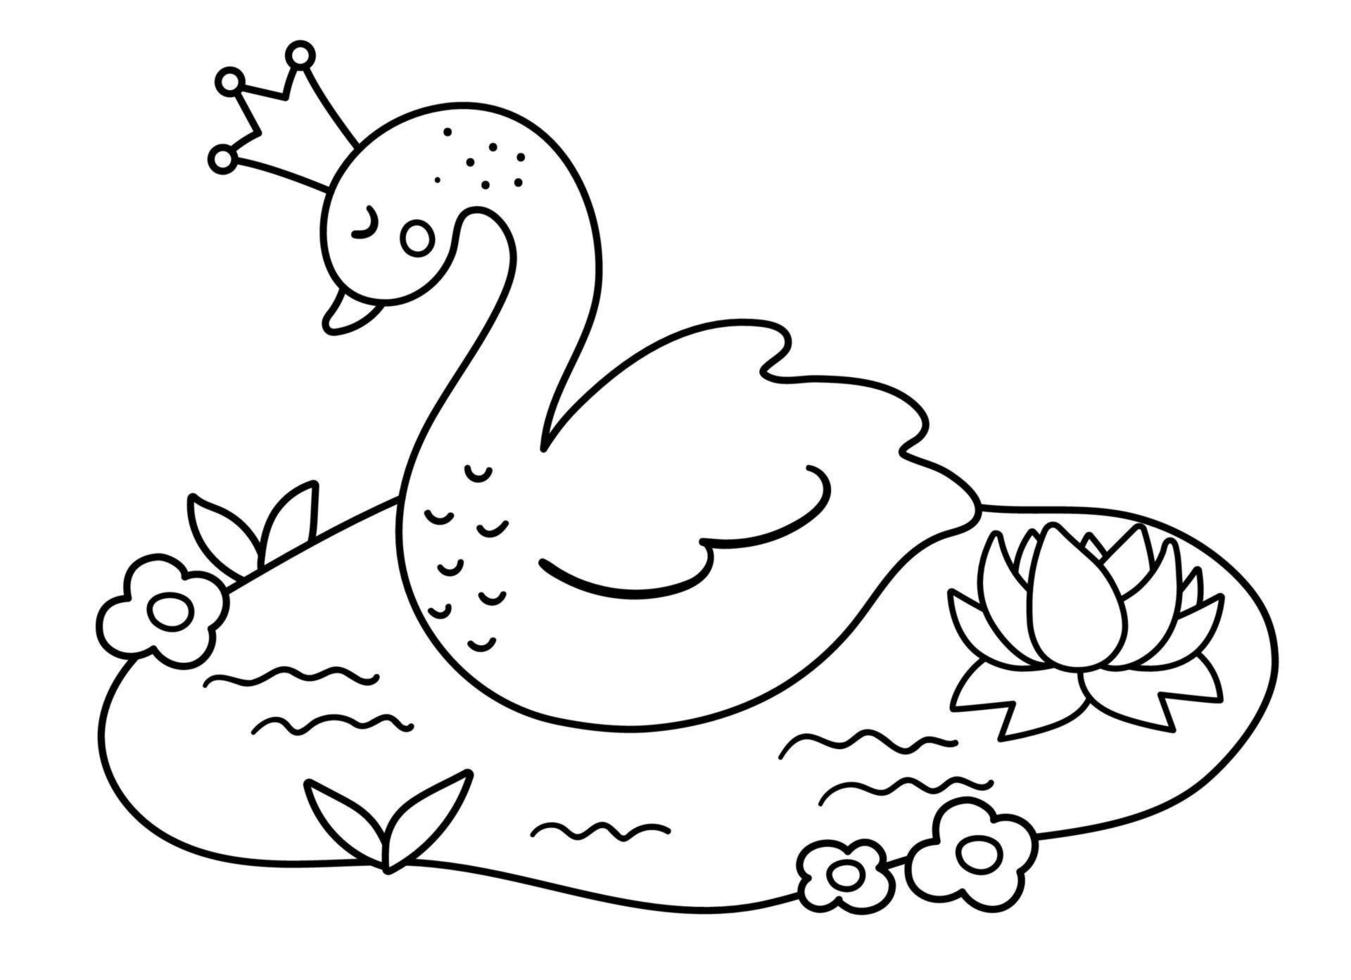 Fairy tale black and white vector swan princess. Fantasy line bird in crown in pond with water lily. Fairytale animal character. Cartoon magic icon or coloring page